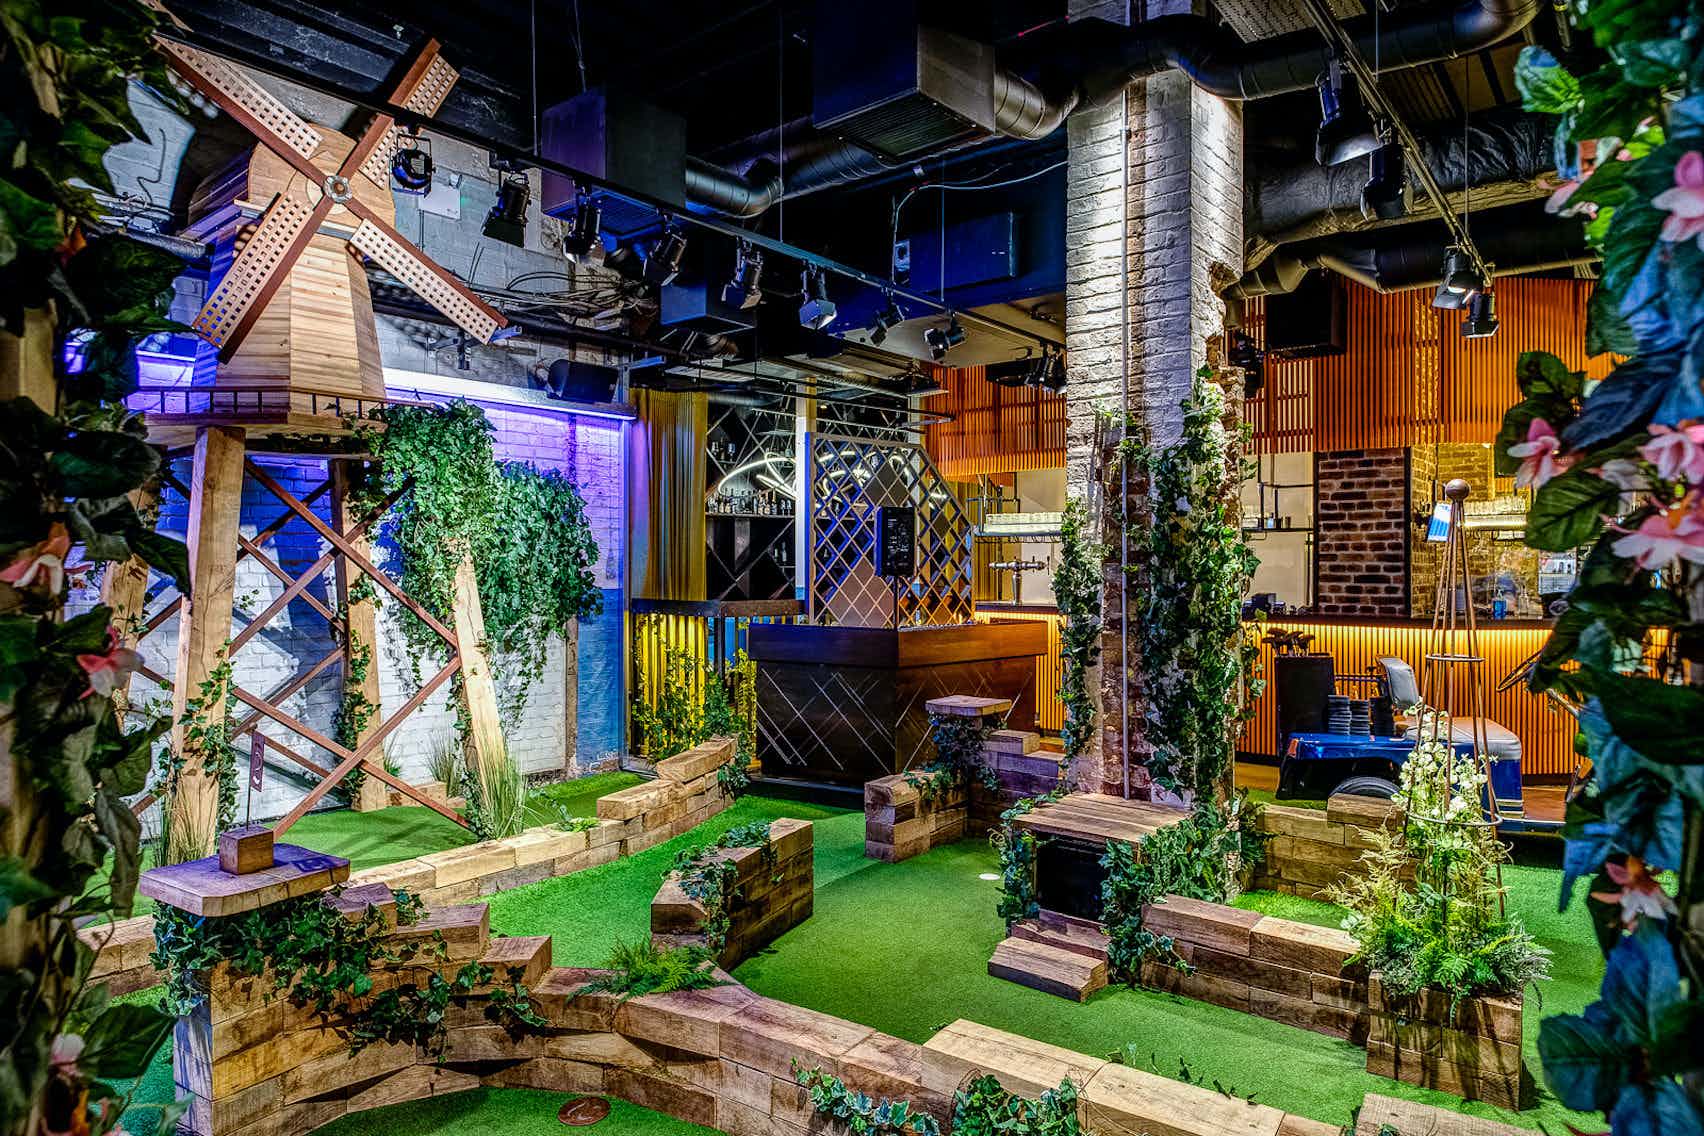 a mini golf course with a green faux grass floor and a windmill in an upscale venue